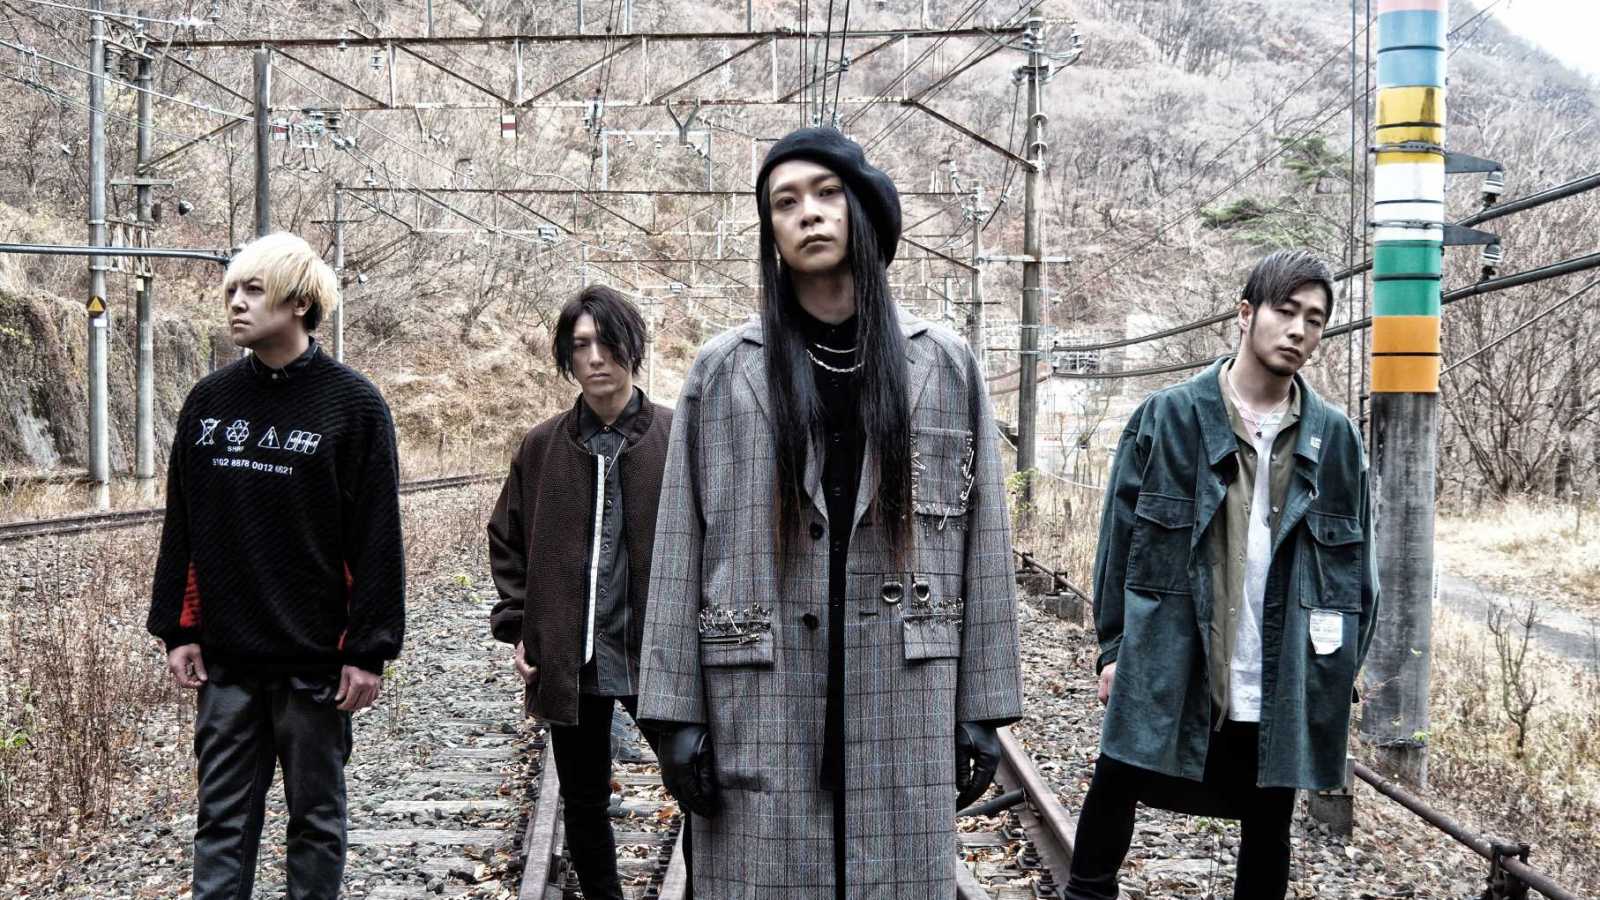 MUCC to Live Stream Budokan One-Man Worldwide © MUCC. All rights reserved.